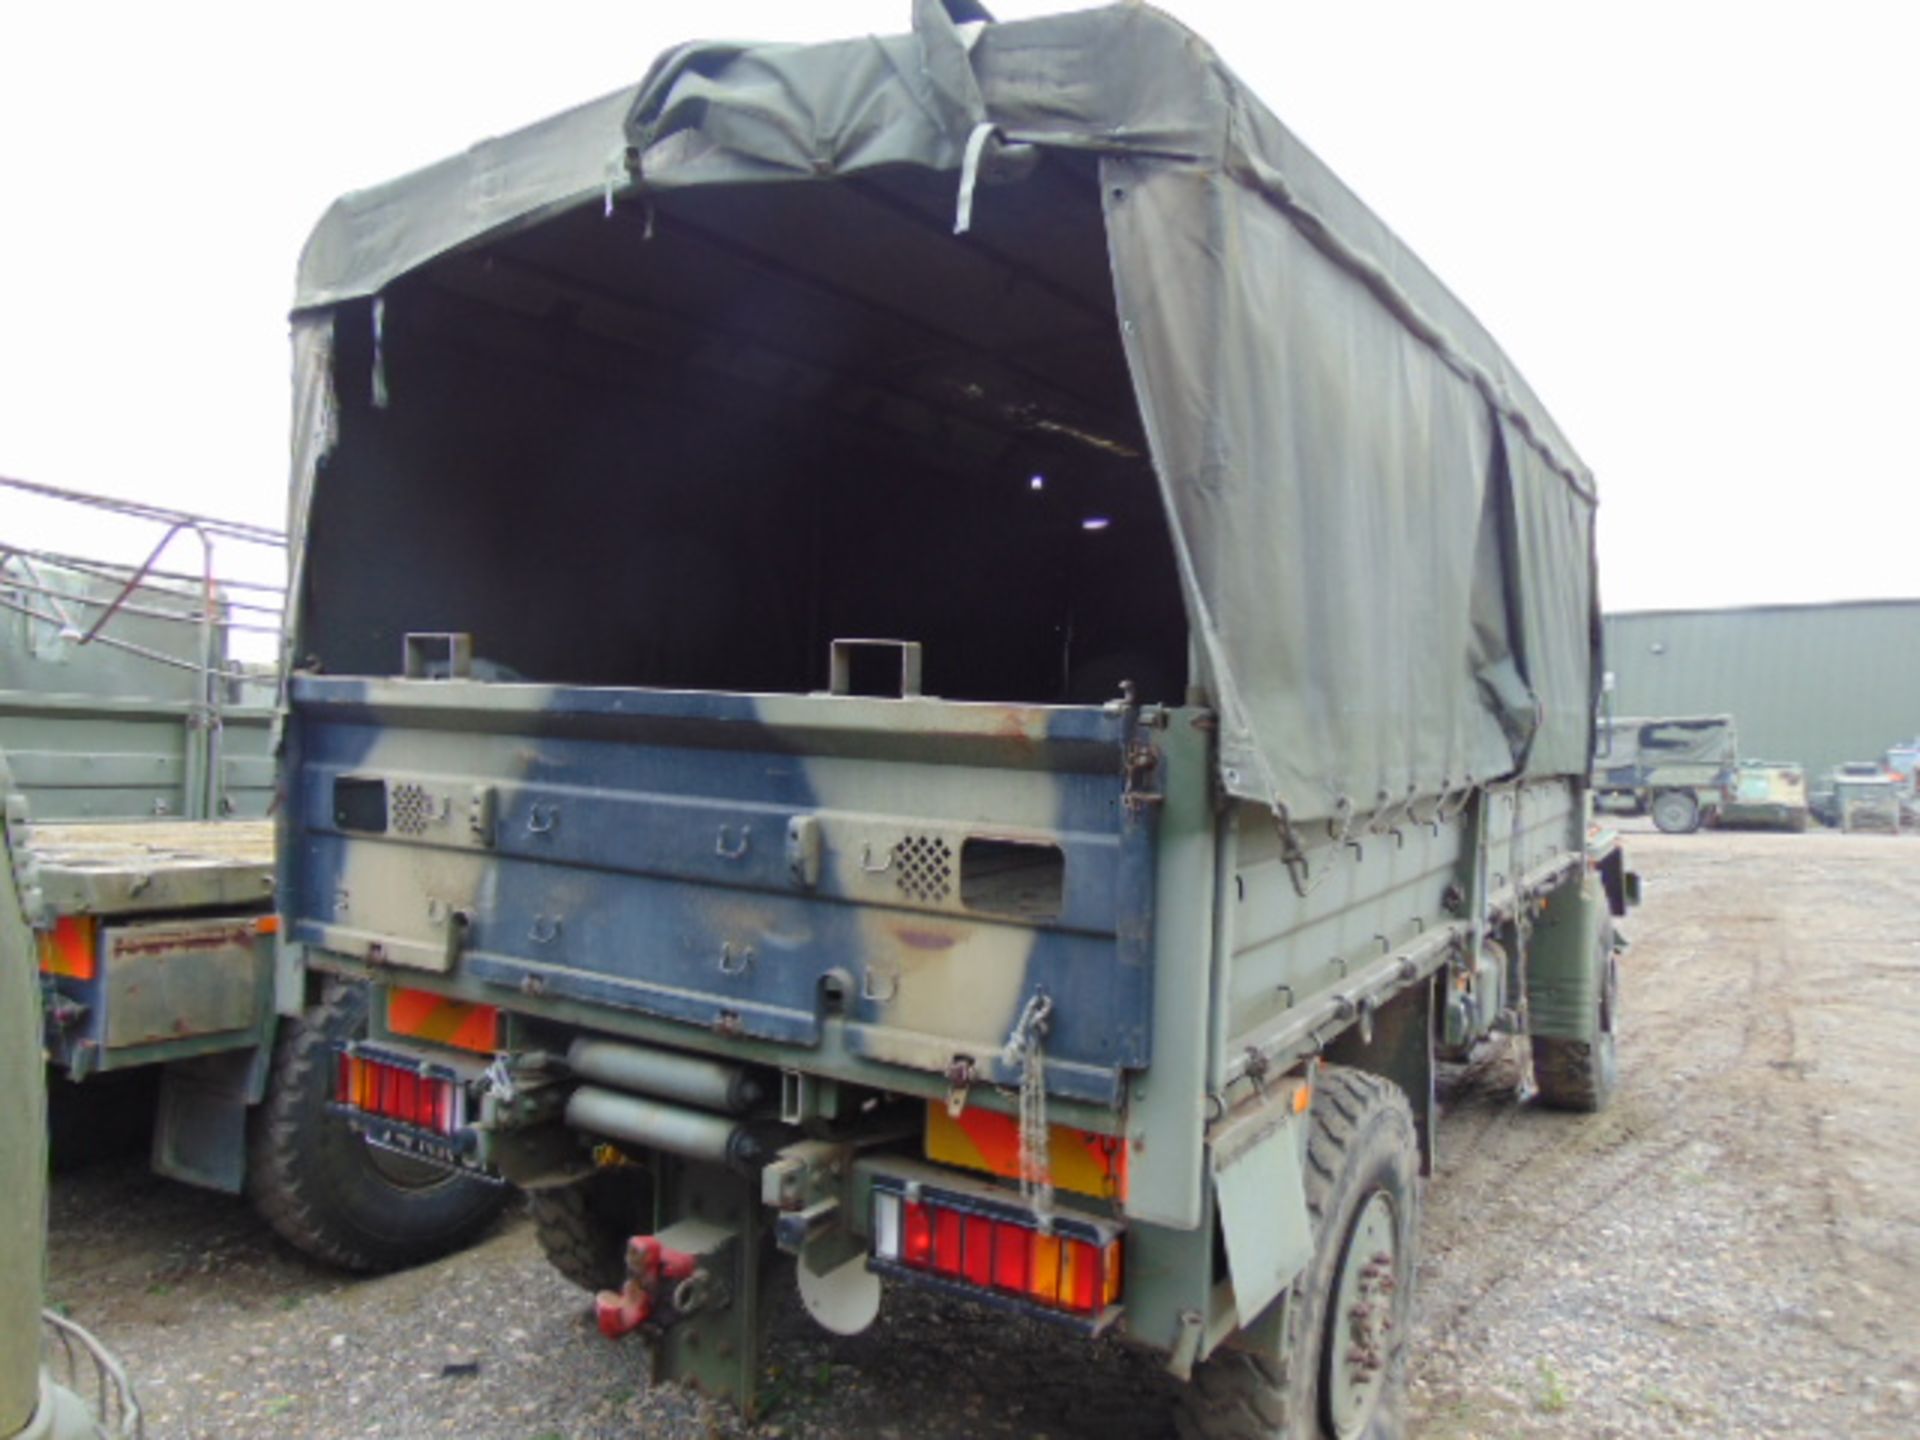 Left Hand Drive Leyland Daf 45/150 4 x 4 Winch Truck - Image 5 of 9